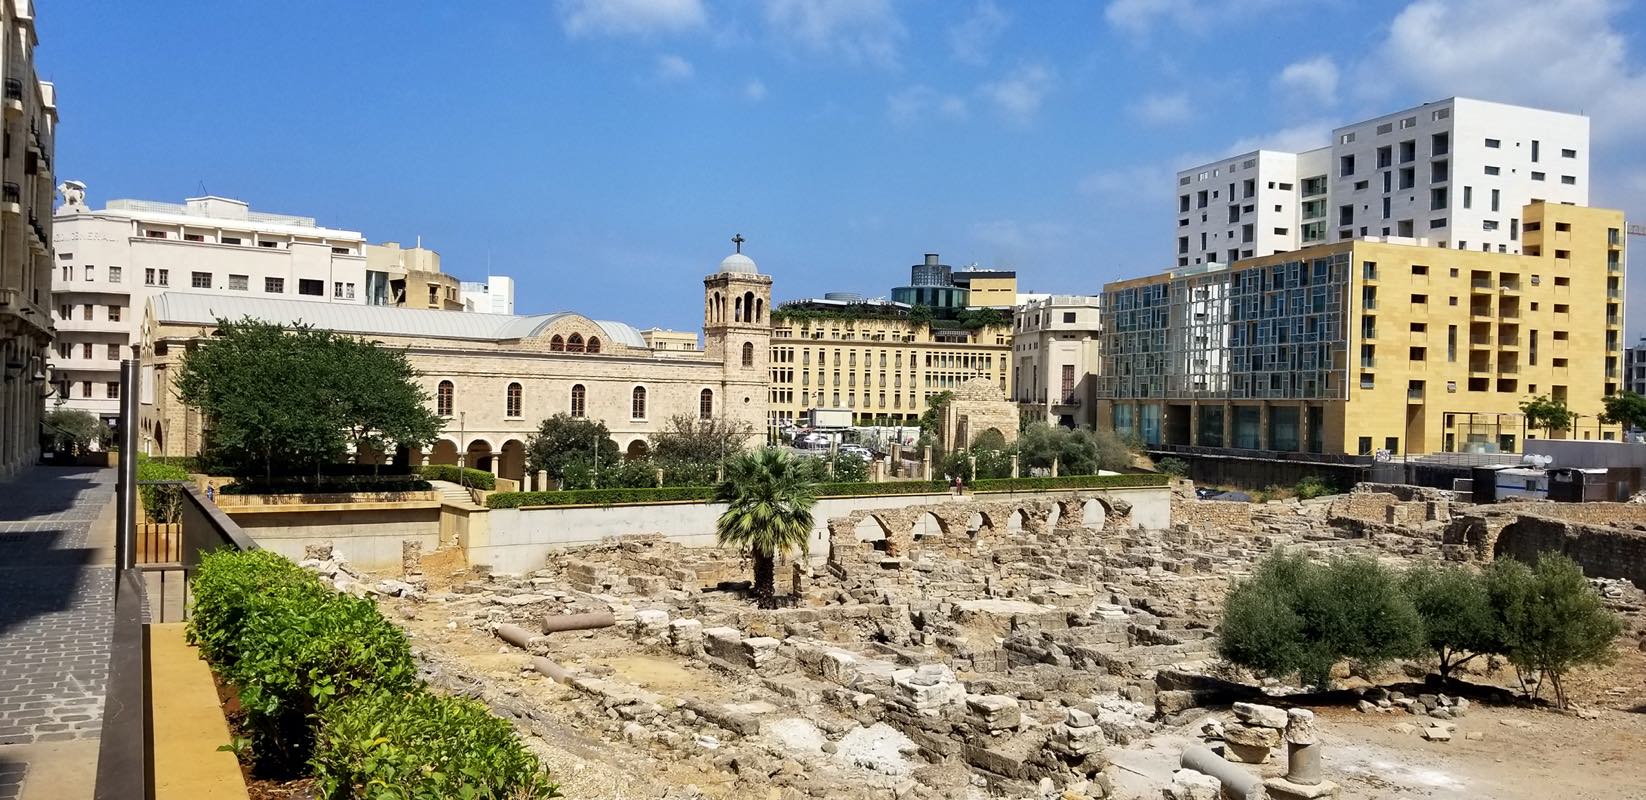 Garden of Forgiveness - View over Roman archaeological site, with St. George Greek Orthodox Cathedral in background.